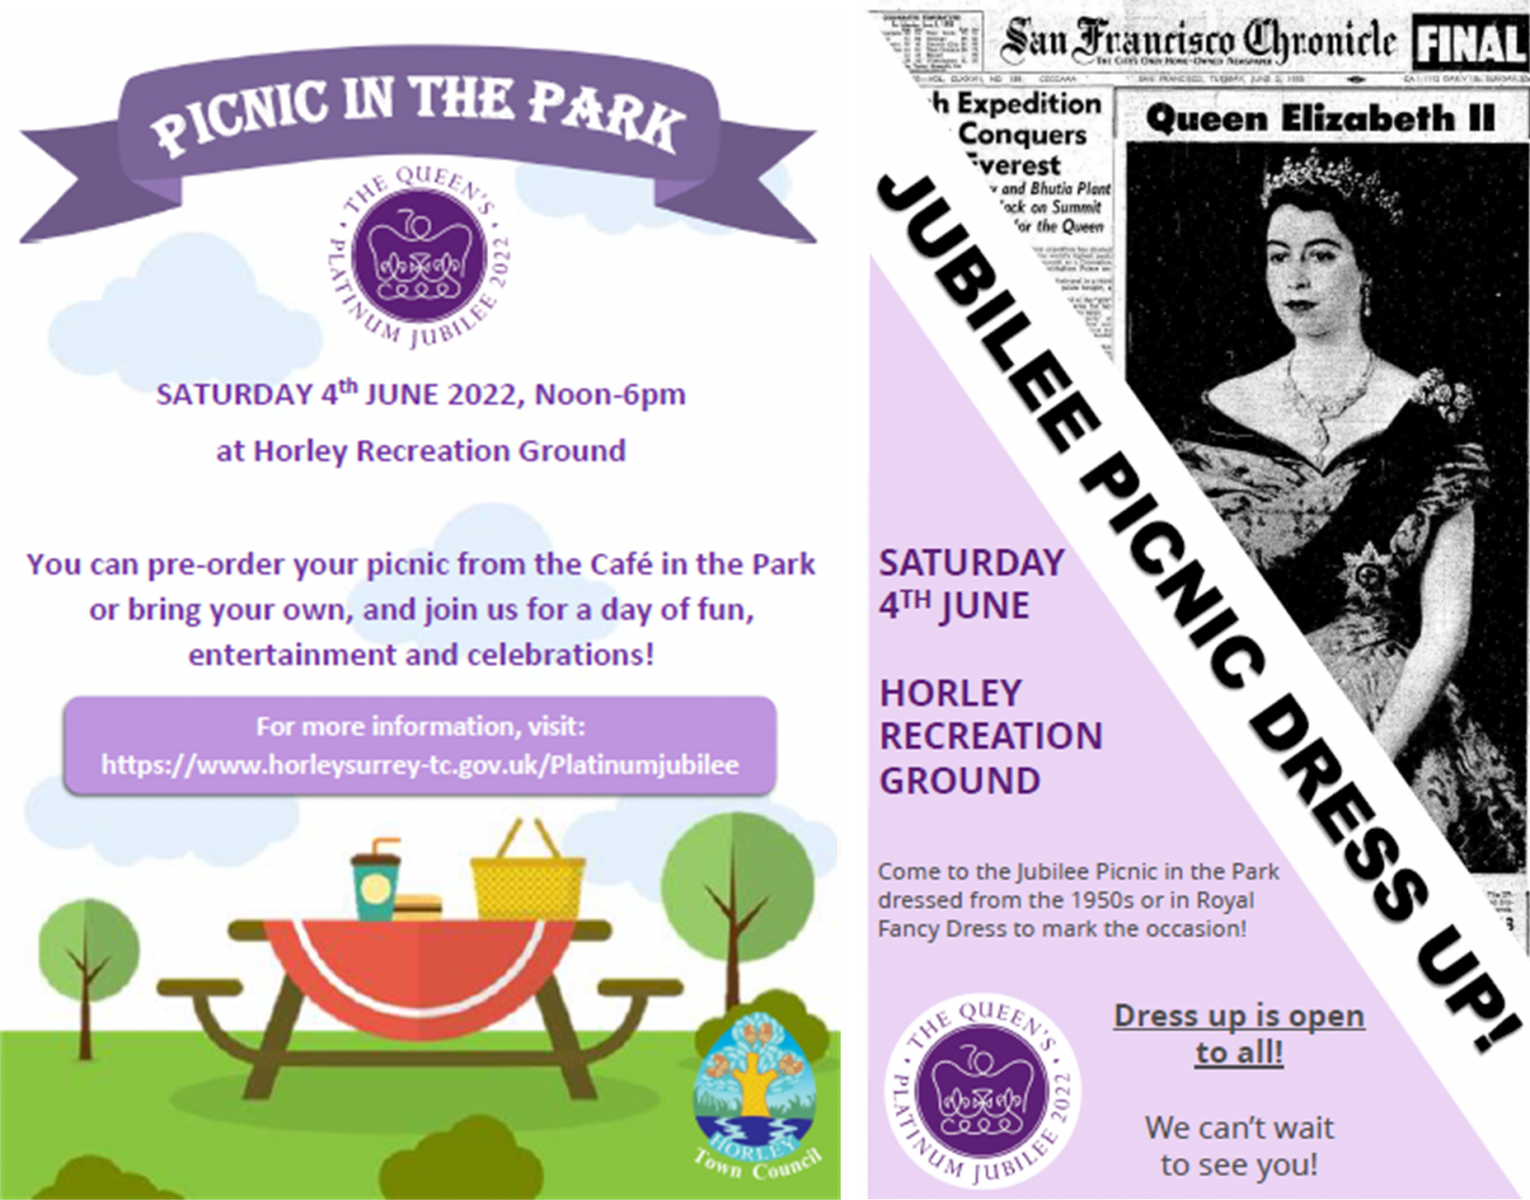 Posters to advertise the picnic in the park